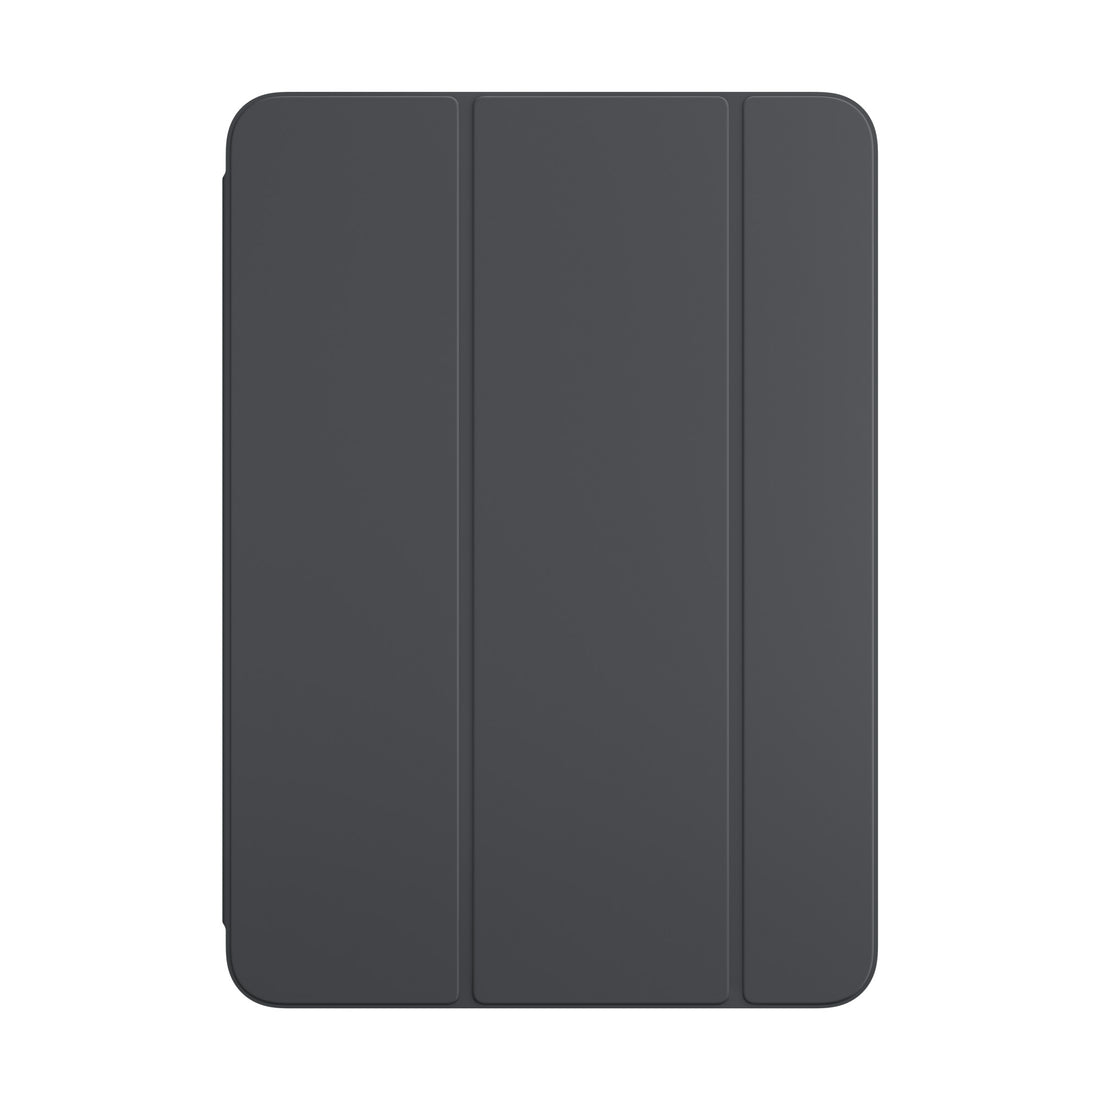 Apple Smart Folio for iPad Pro 11-inch (M4) - Preorder now. Pickup starting May 15th